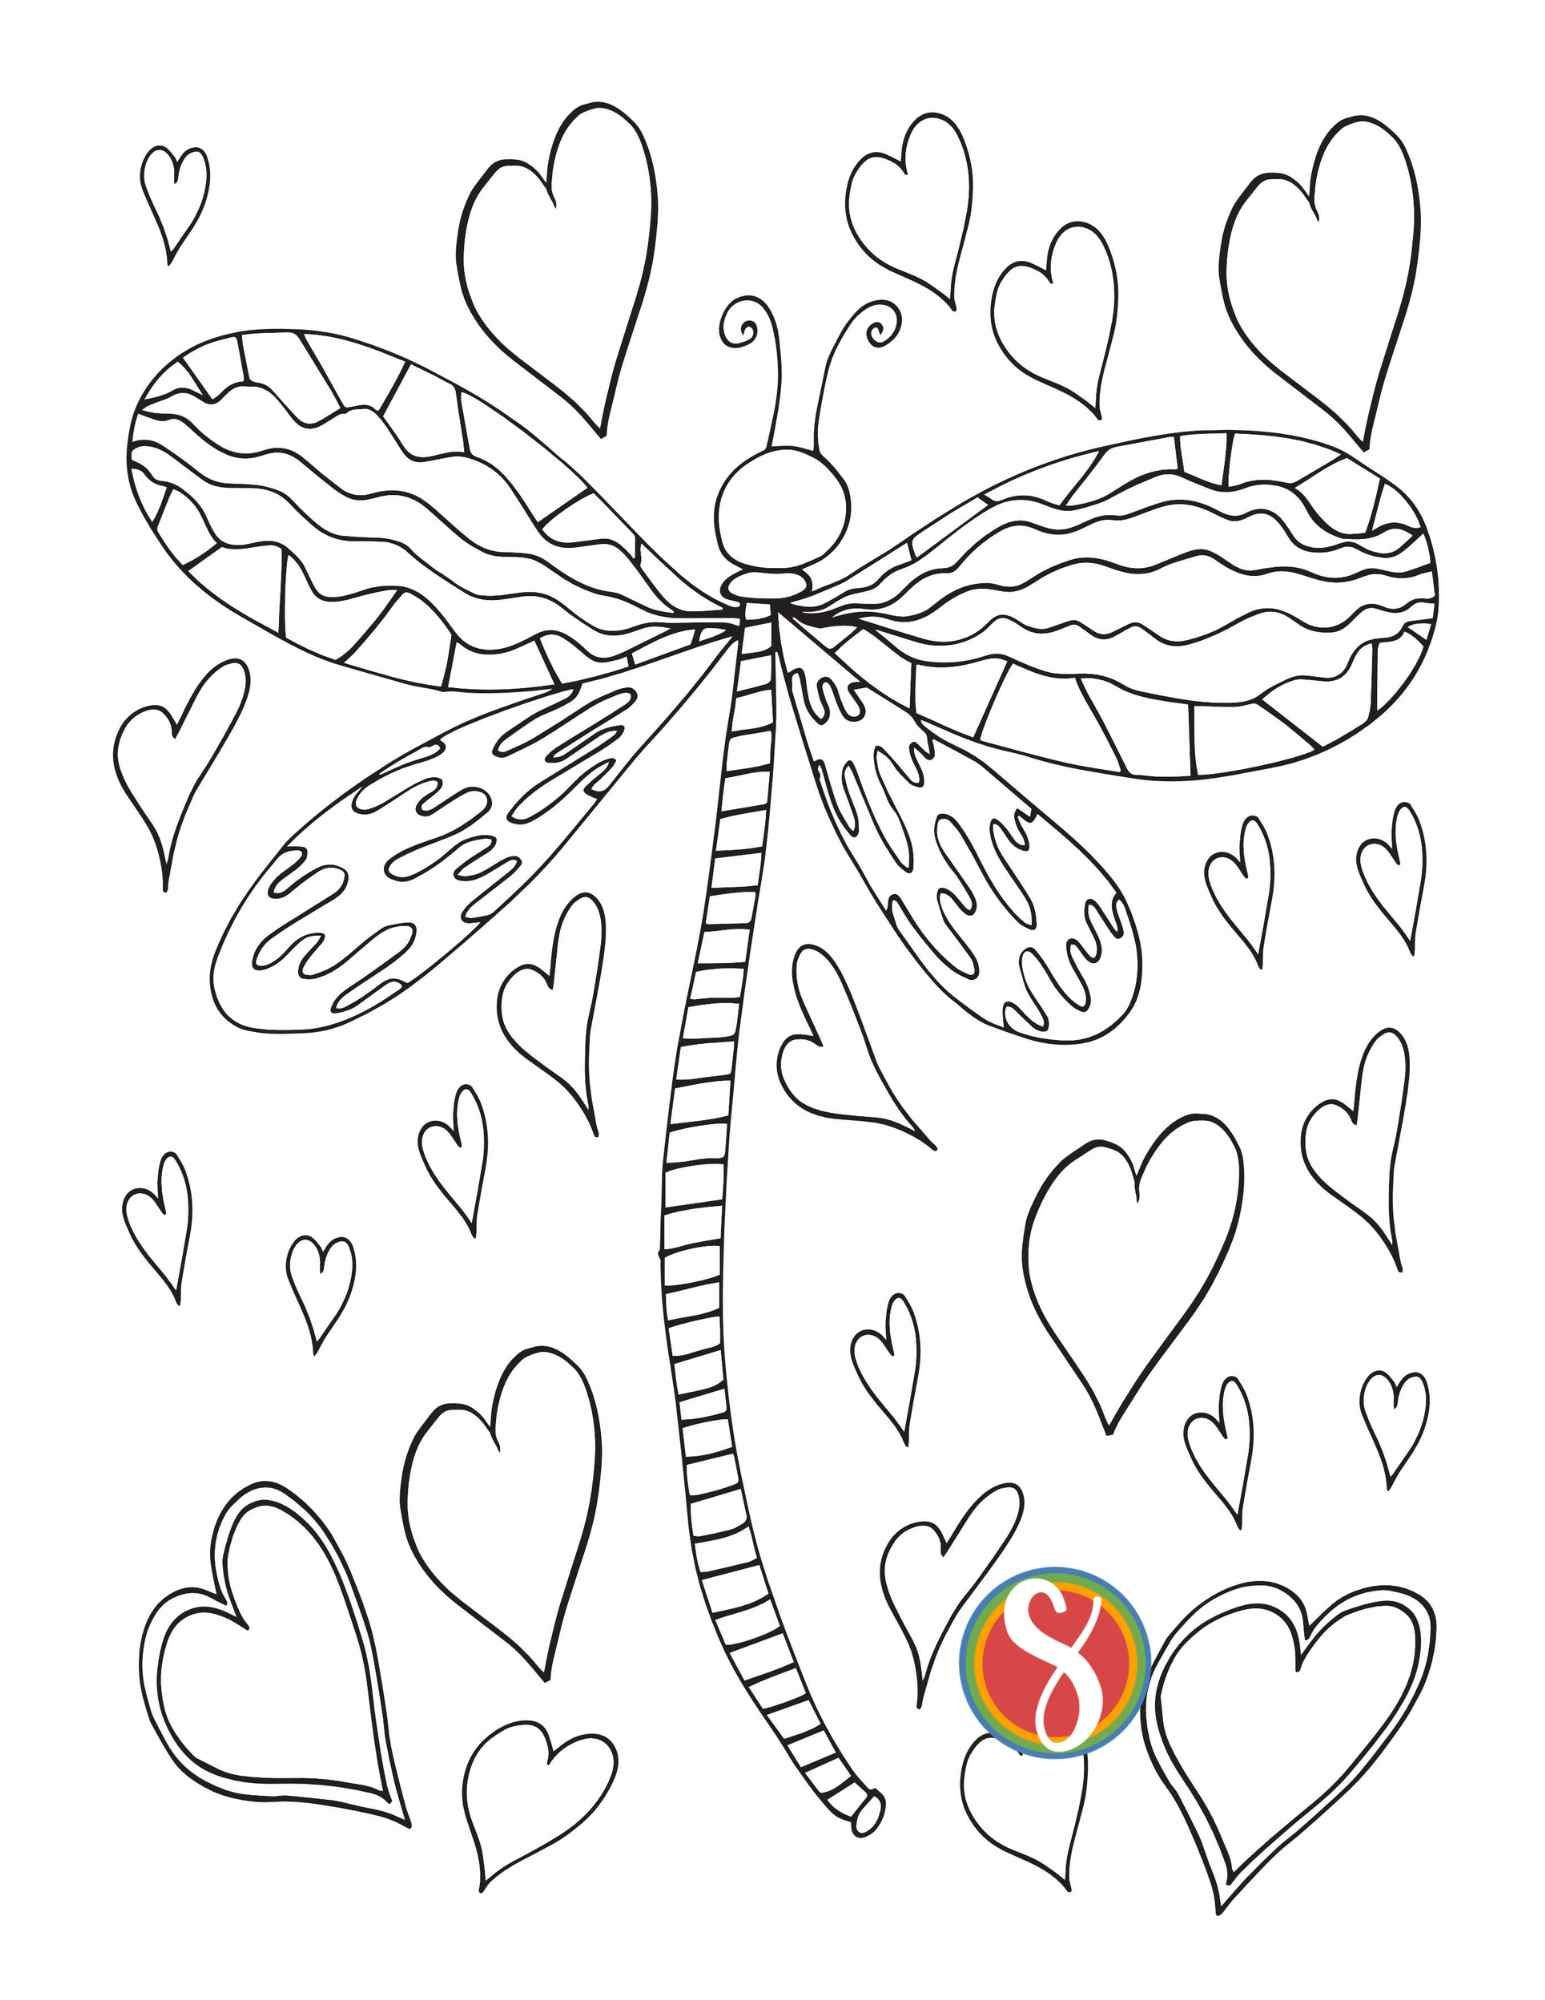 Free dragonfly coloring pages â stevie doodles